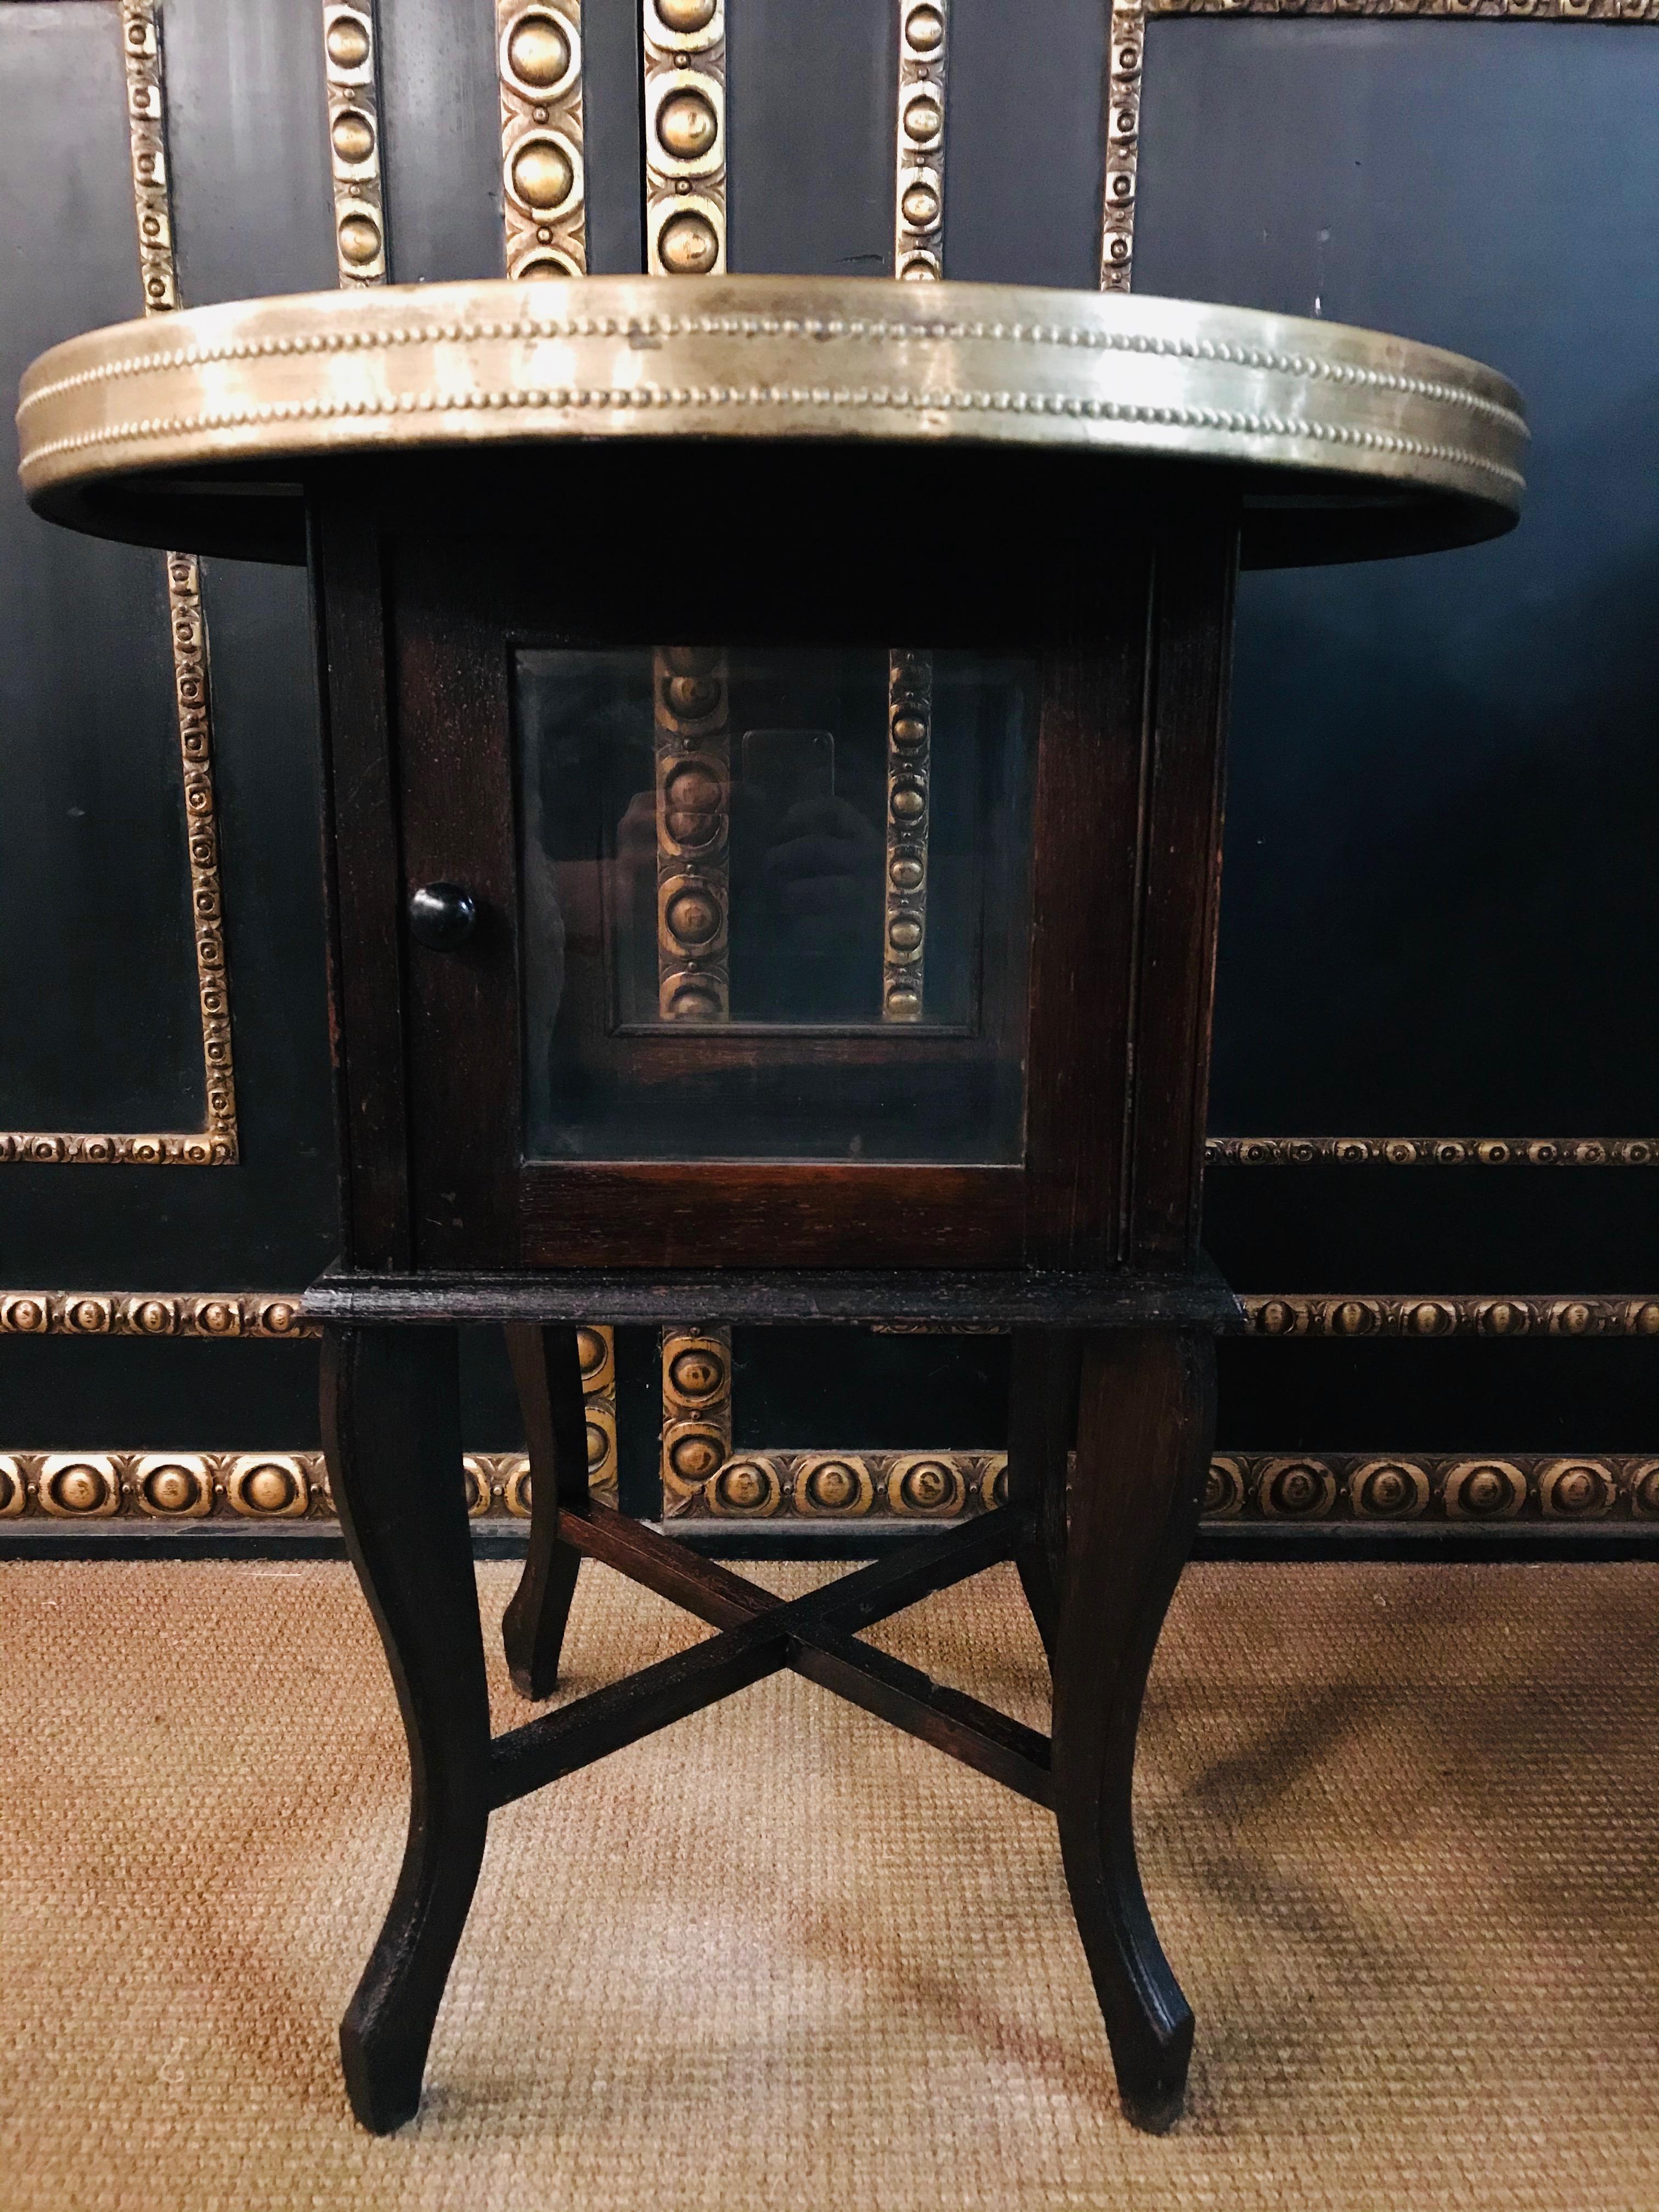 The table has not been restored, it has slight signs of wear consistent with age

see detailed pictures no major damage.

Plate very elaborately worked.

 Brass plate very nice old patina and nice checkerboard pattern.

The exact condition